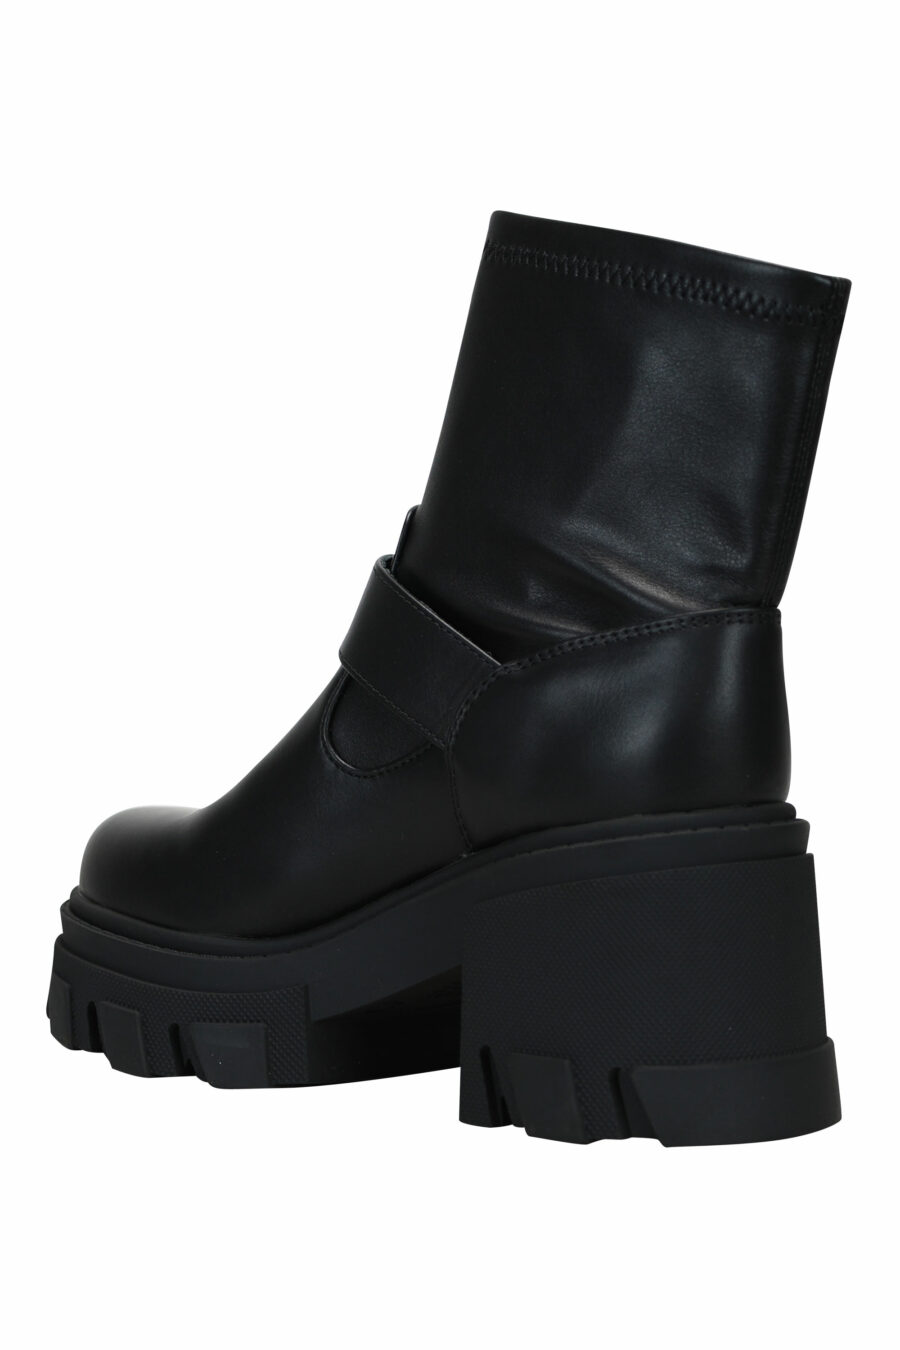 Black ankle boots with baroque buckle and platform - 8052019461084 3